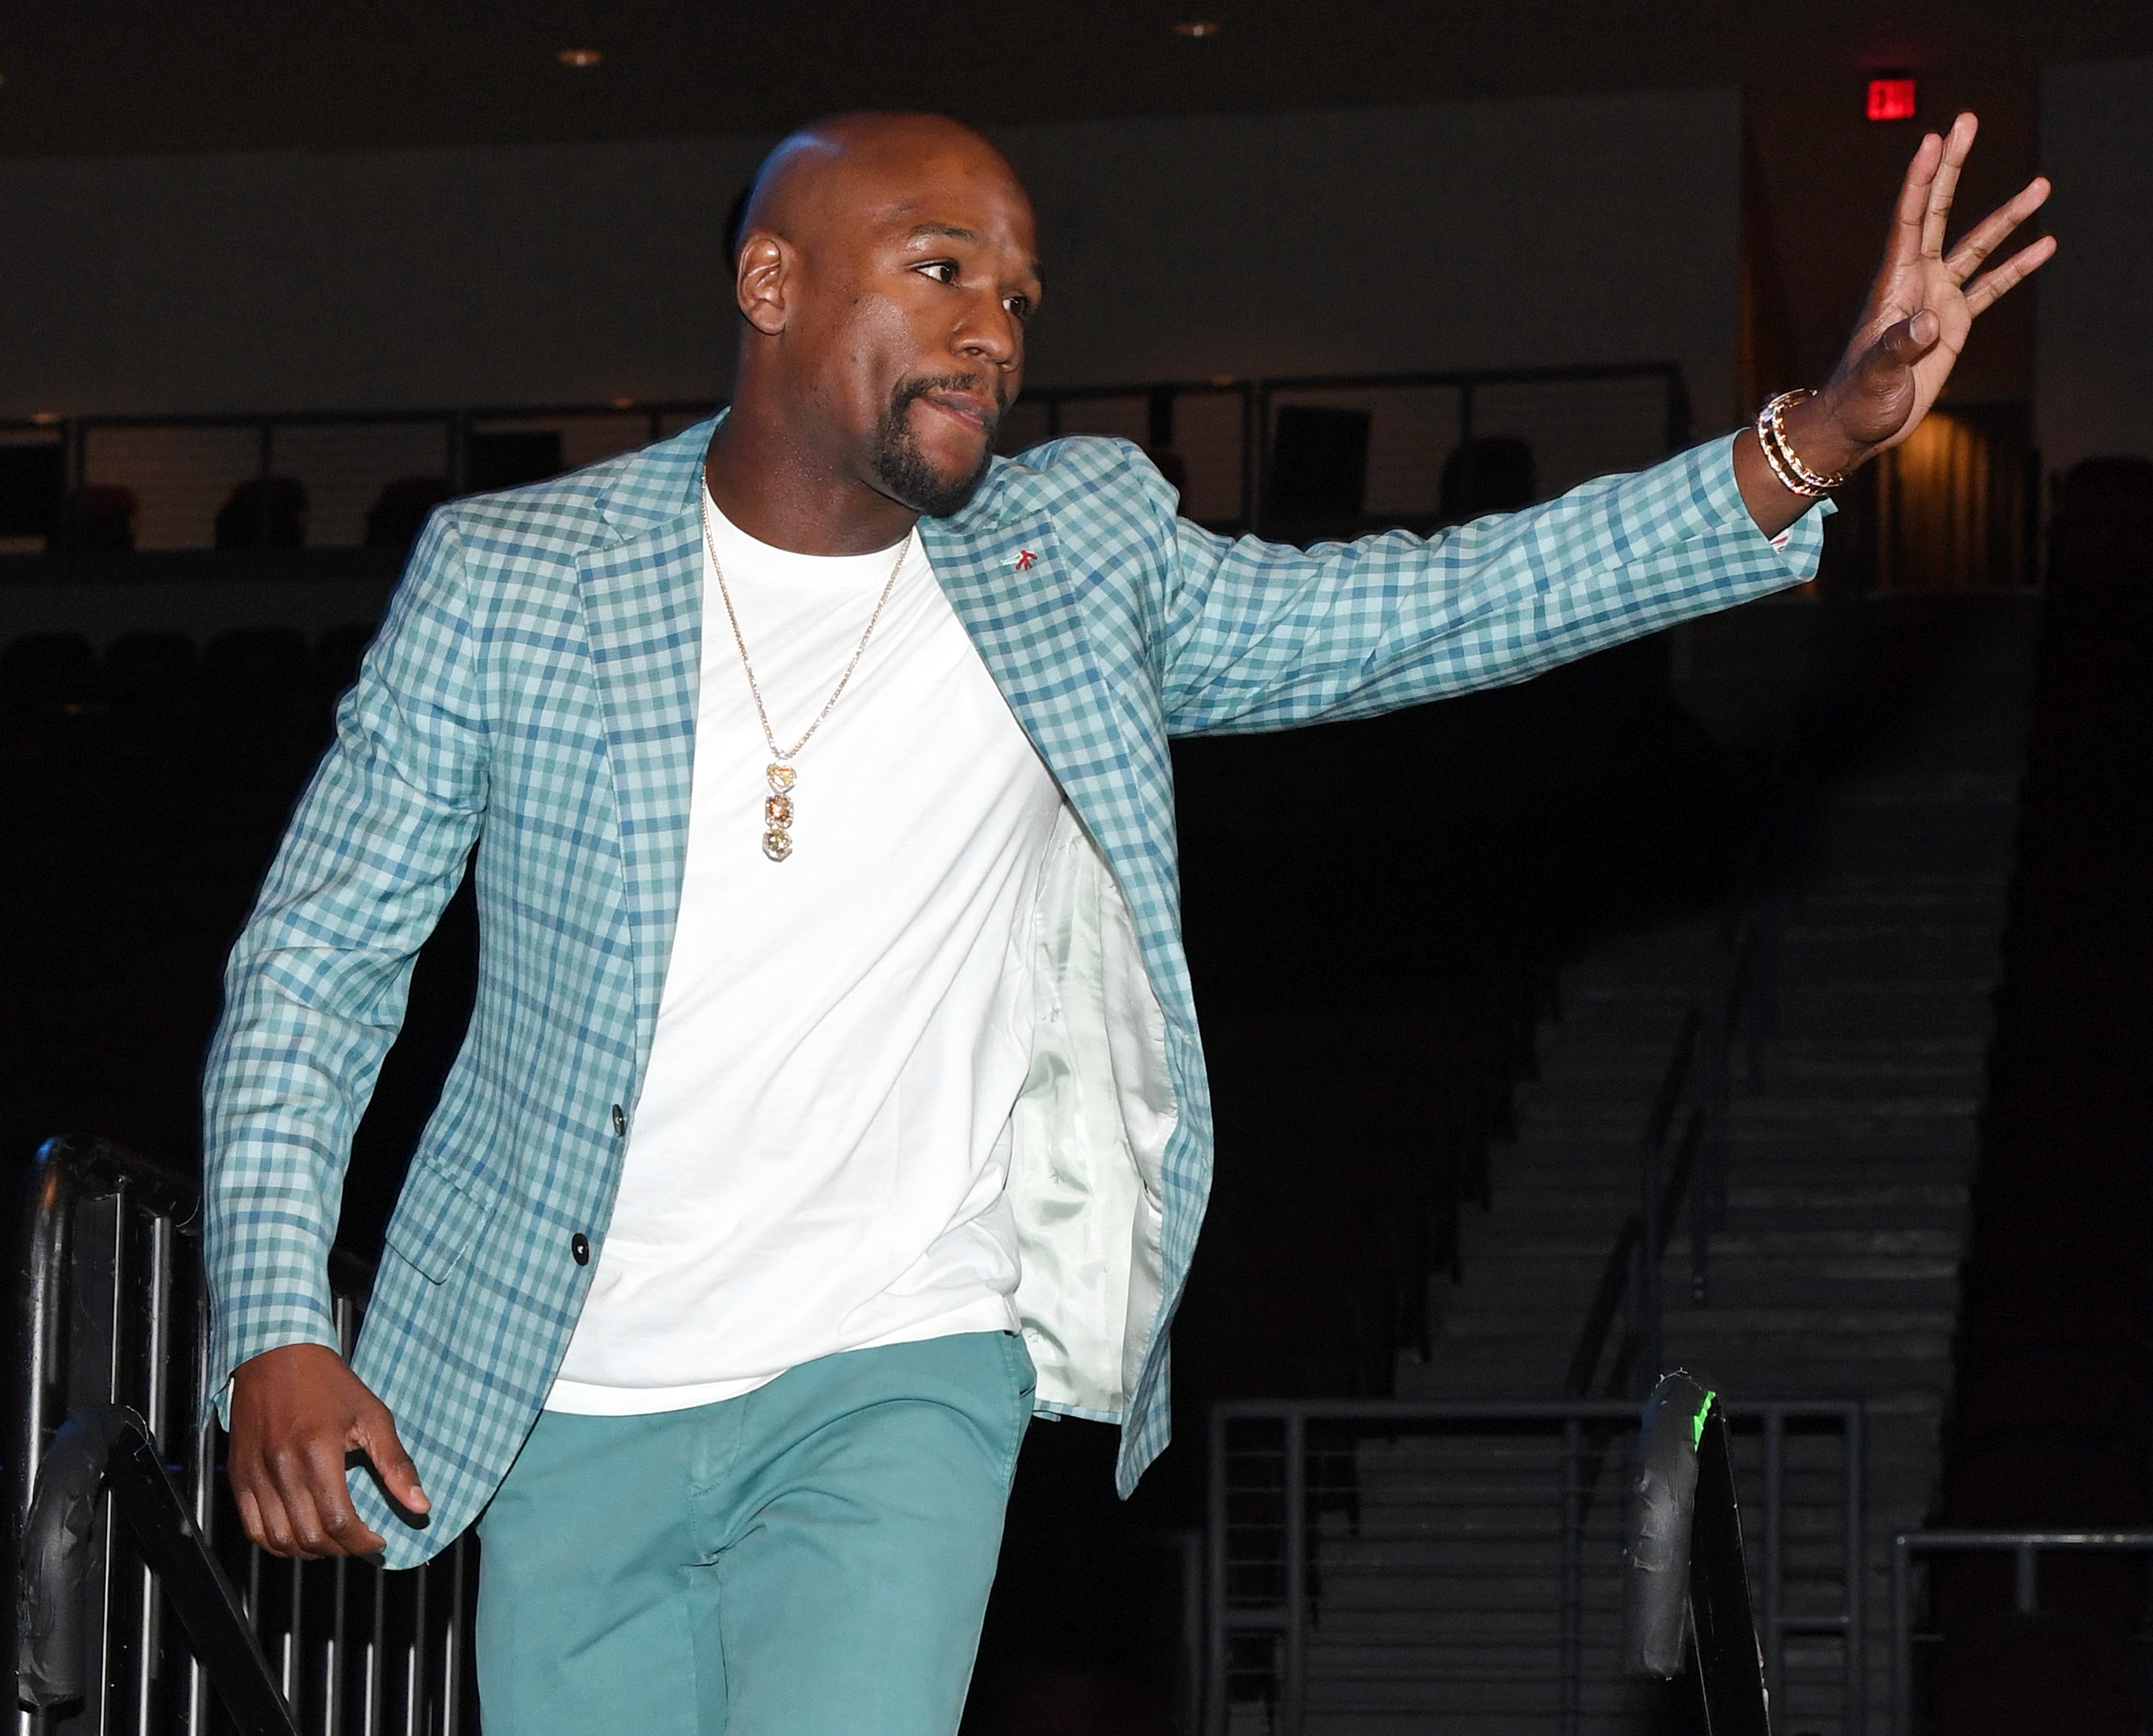 Floyd Mayweather Is Finally Heading to the Hall of Fame